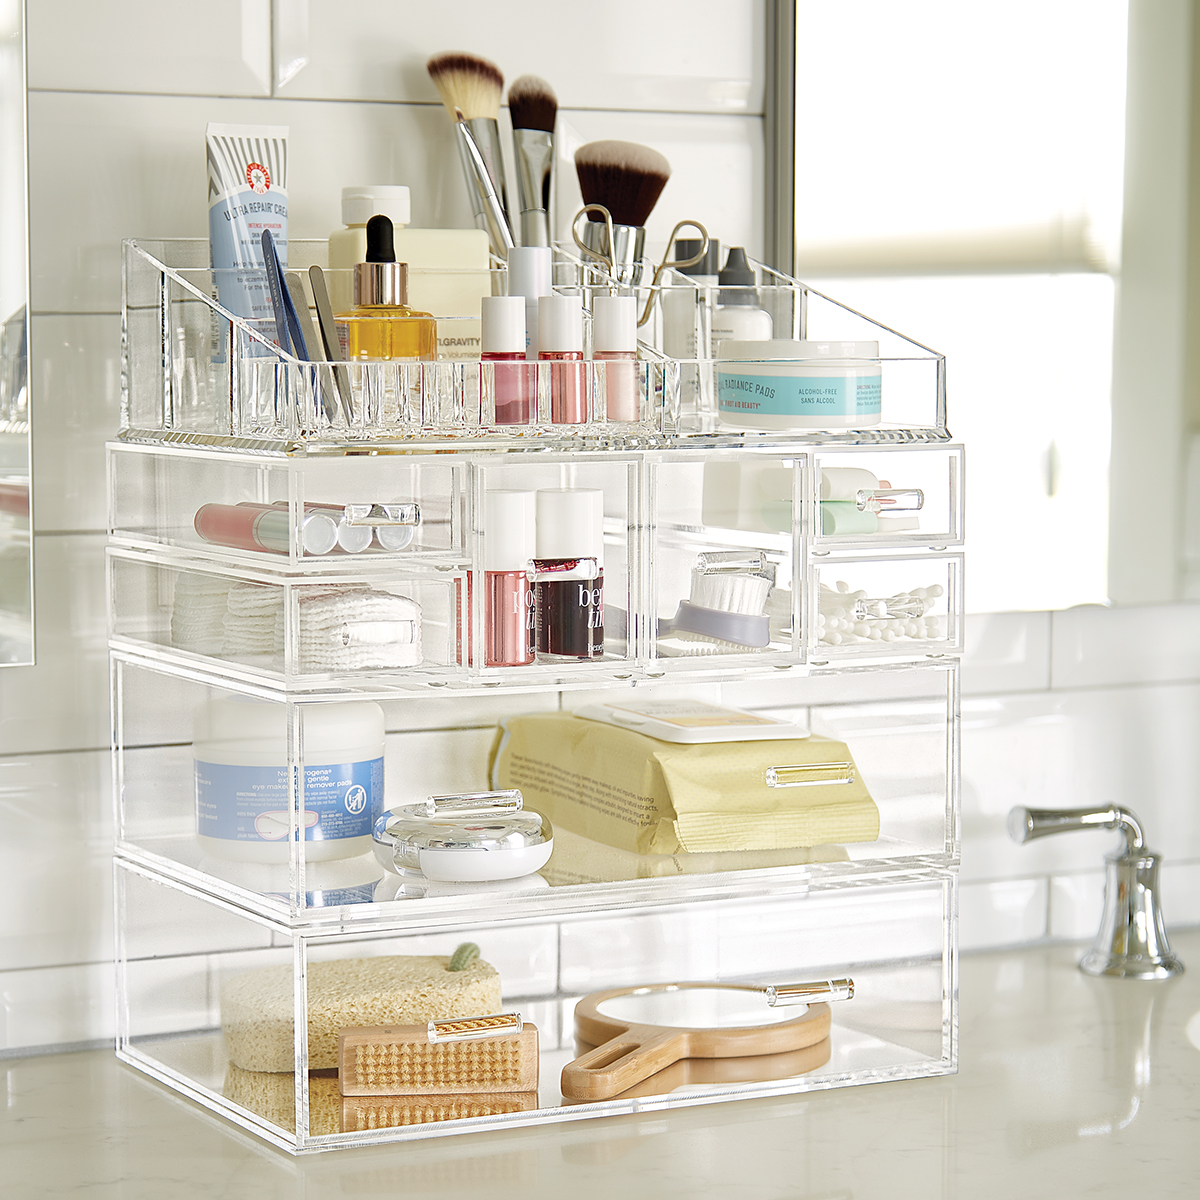 https://www.containerstore.com/catalogimages/321969/CF_17_10021945-Acrylic-Makeup-Organi.jpg